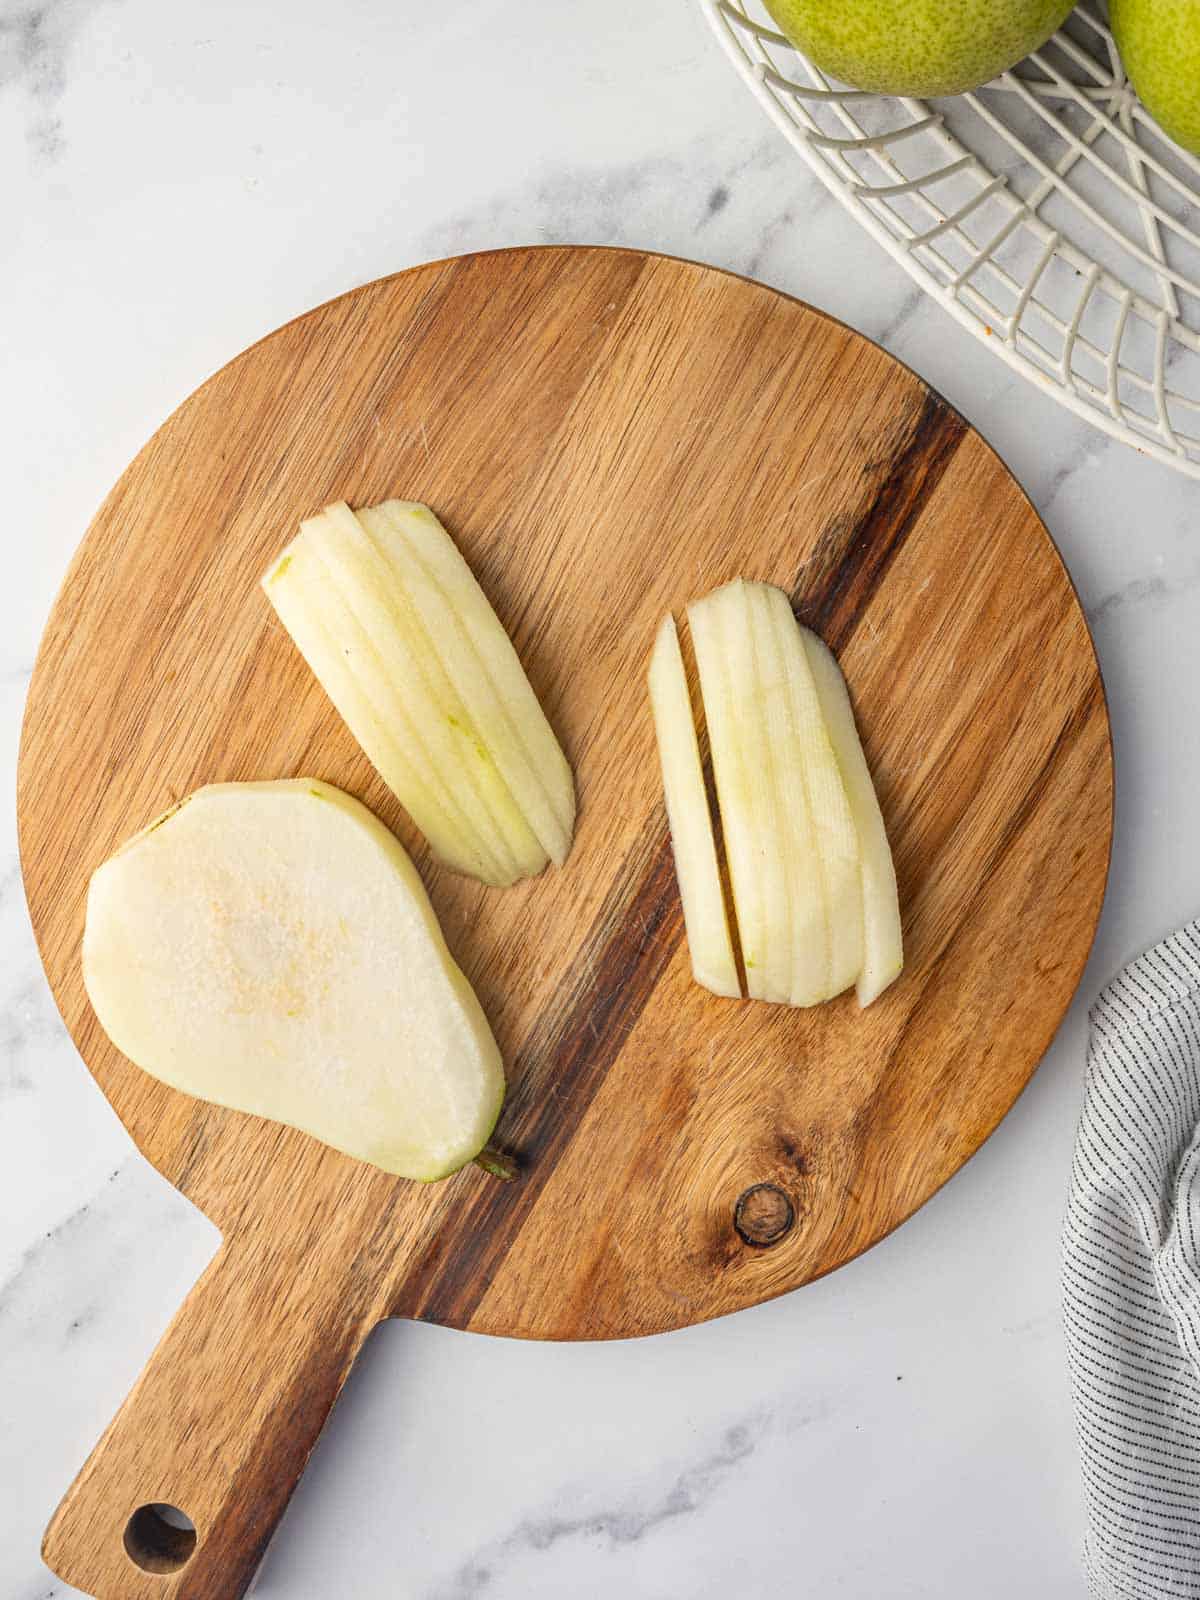 Thin slices of pears on a cutting board.